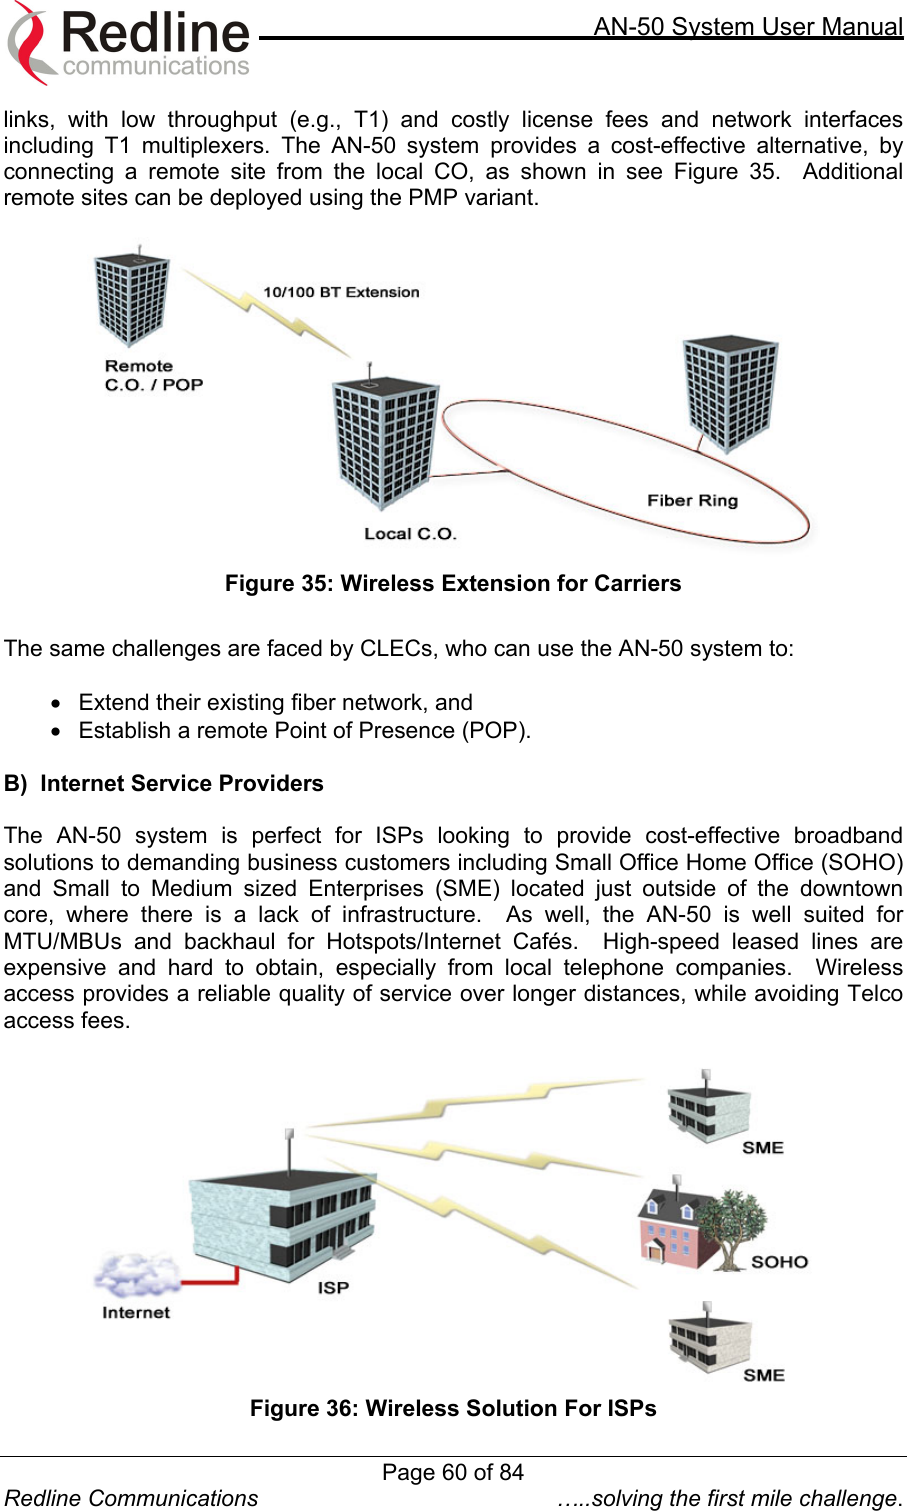     AN-50 System User Manual  Redline Communications  …..solving the first mile challenge. links, with low throughput (e.g., T1) and costly license fees and network interfaces including T1 multiplexers. The AN-50 system provides a cost-effective alternative, by connecting a remote site from the local CO, as shown in see Figure 35.  Additional remote sites can be deployed using the PMP variant.     Figure 35: Wireless Extension for Carriers  The same challenges are faced by CLECs, who can use the AN-50 system to:   •  Extend their existing fiber network, and  •  Establish a remote Point of Presence (POP).     B)  Internet Service Providers  The AN-50 system is perfect for ISPs looking to provide cost-effective broadband solutions to demanding business customers including Small Office Home Office (SOHO) and Small to Medium sized Enterprises (SME) located just outside of the downtown core, where there is a lack of infrastructure.  As well, the AN-50 is well suited for MTU/MBUs and backhaul for Hotspots/Internet Cafés.  High-speed leased lines are expensive and hard to obtain, especially from local telephone companies.  Wireless access provides a reliable quality of service over longer distances, while avoiding Telco access fees.     Figure 36: Wireless Solution For ISPs Page 60 of 84